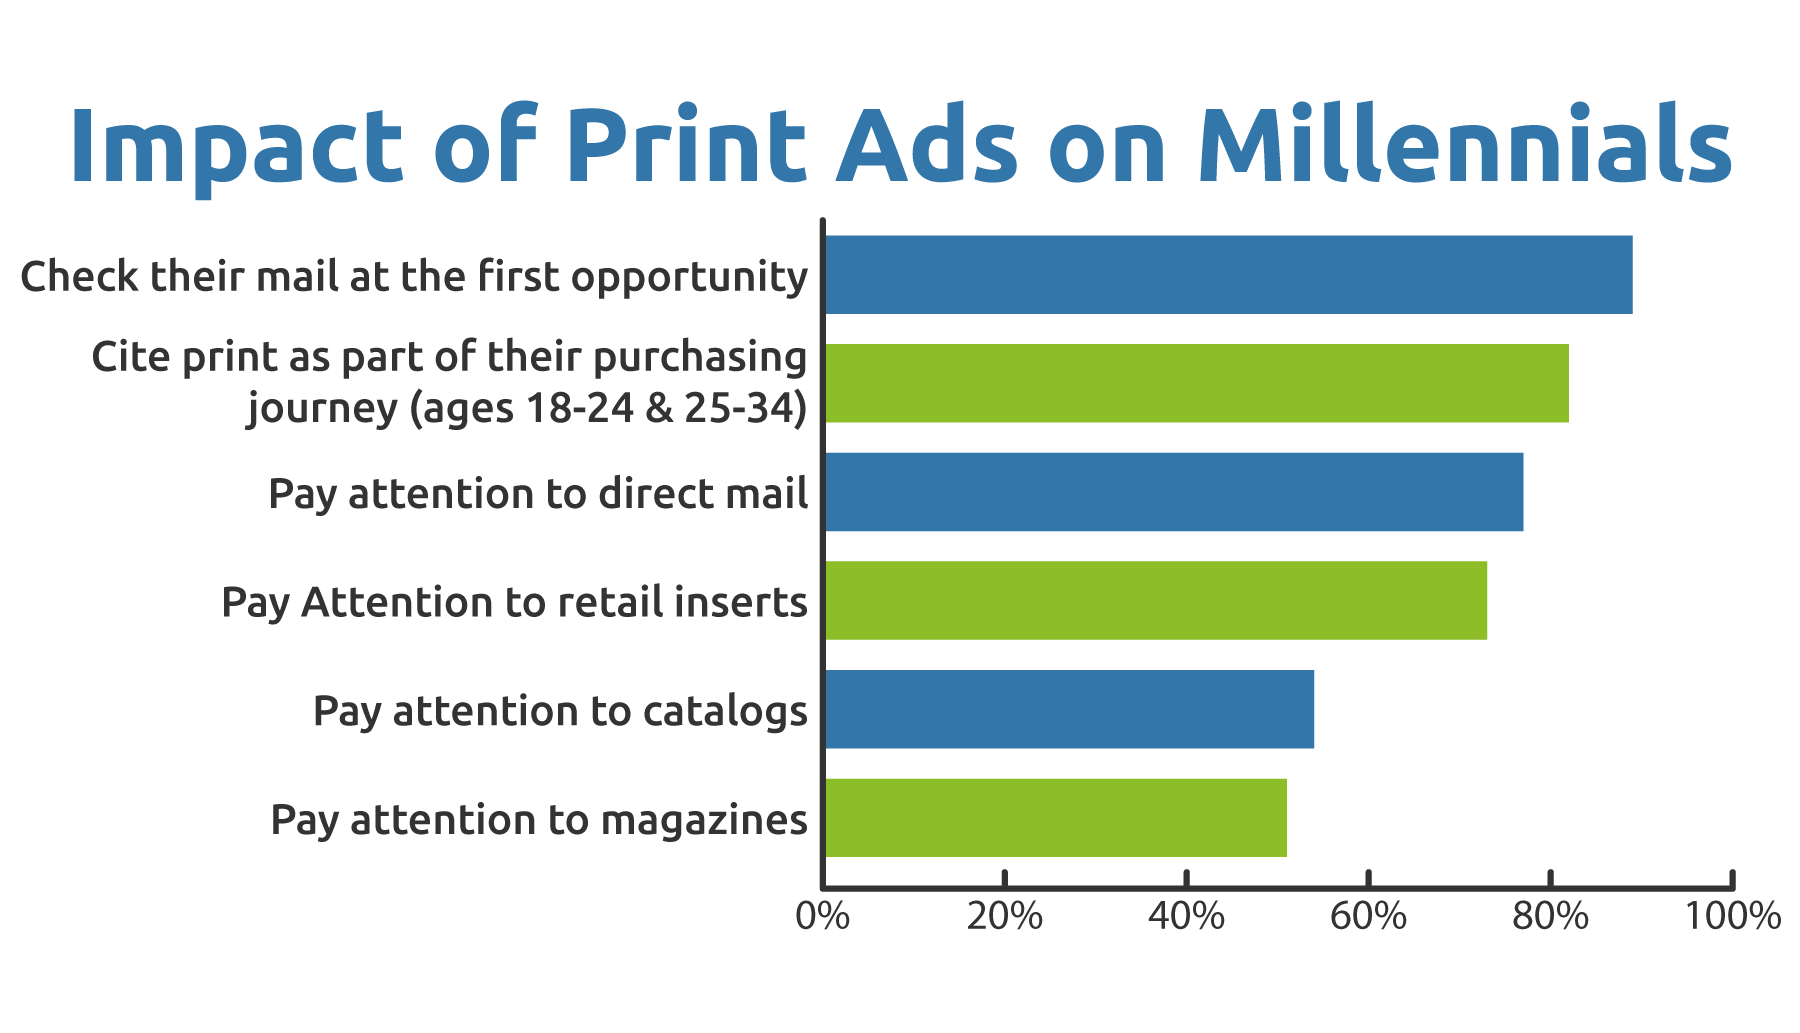 A graph showing the impact of print advertisements on millennials